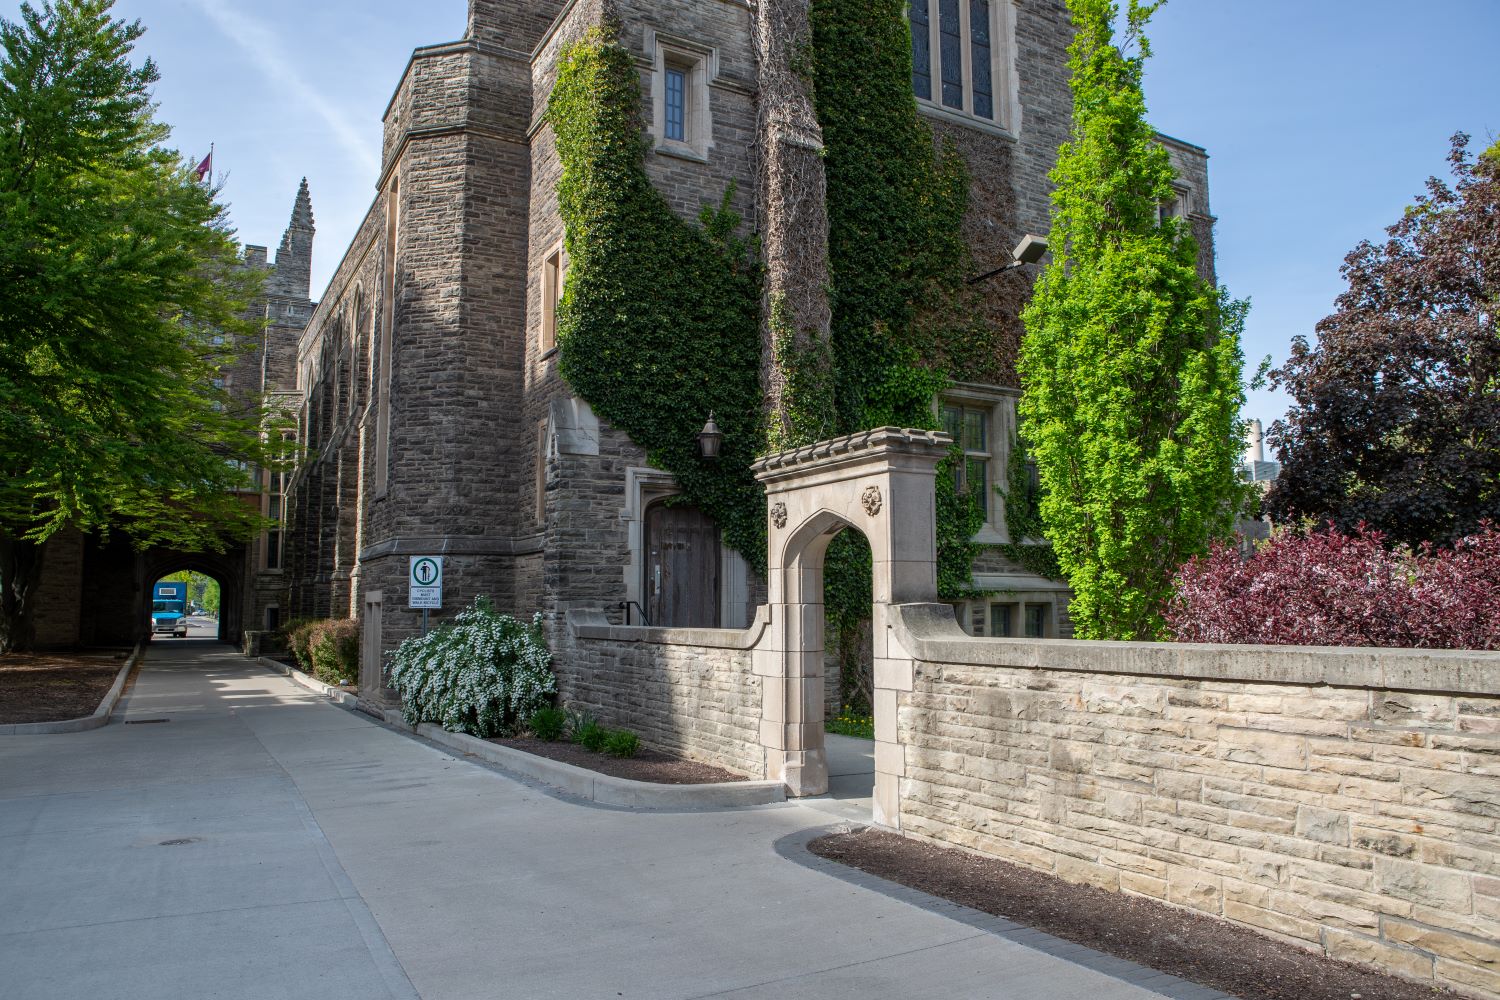 Edward's Archway on McMaster's campus